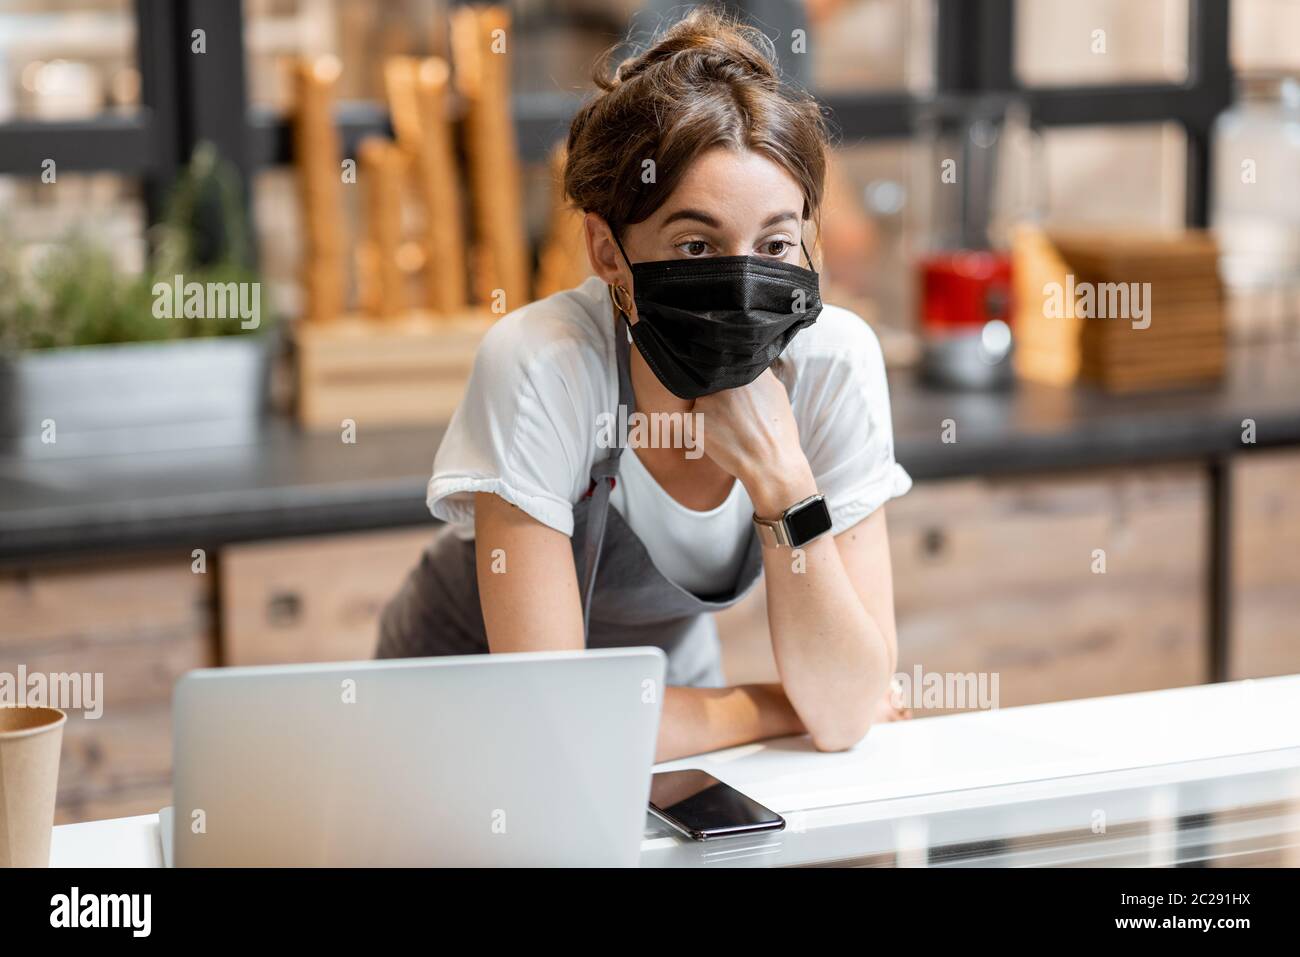 Portrait of a saleswoman or small business owner wearing medical mask at the counter in cafe or small shop. Concept of a retail business during a pandemic Stock Photo